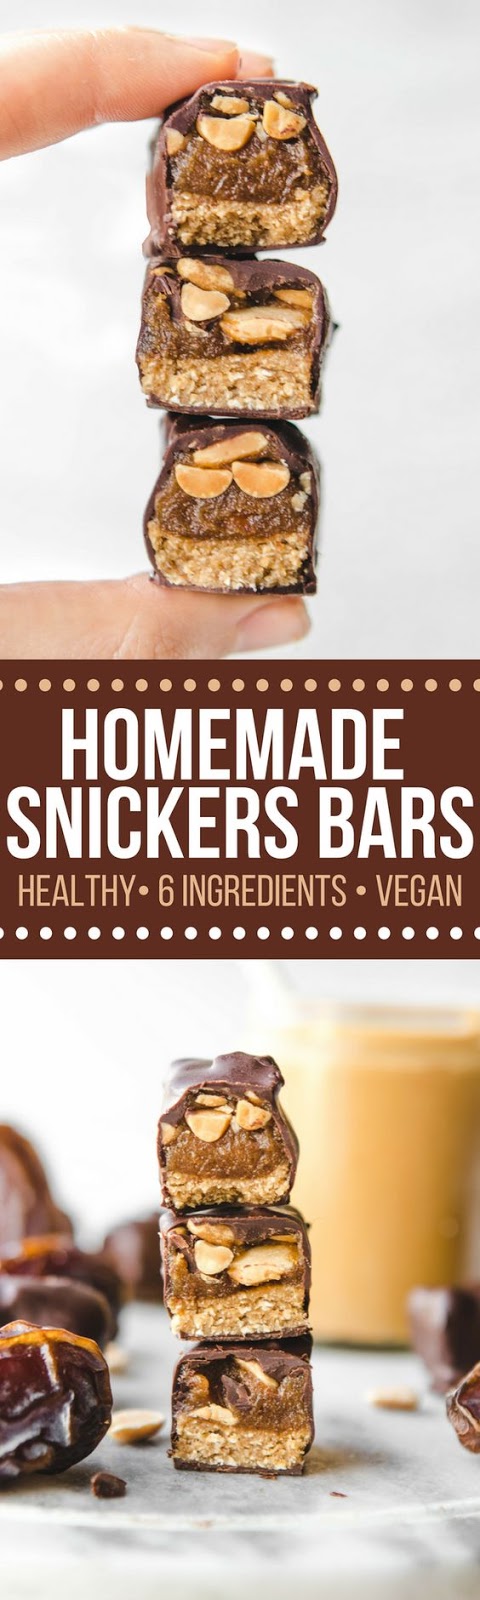 Homemade Snickers Bars that are made with only 6 ingredients! Perfect for a healthy-ish dessert that is vegan, gluten free, and refined sugar free. #vegan #plantbased #candy #healthy #snickers #homemadesnickers #caramel #vegandesserts #chocolate #refinedsugarfree #oilfree